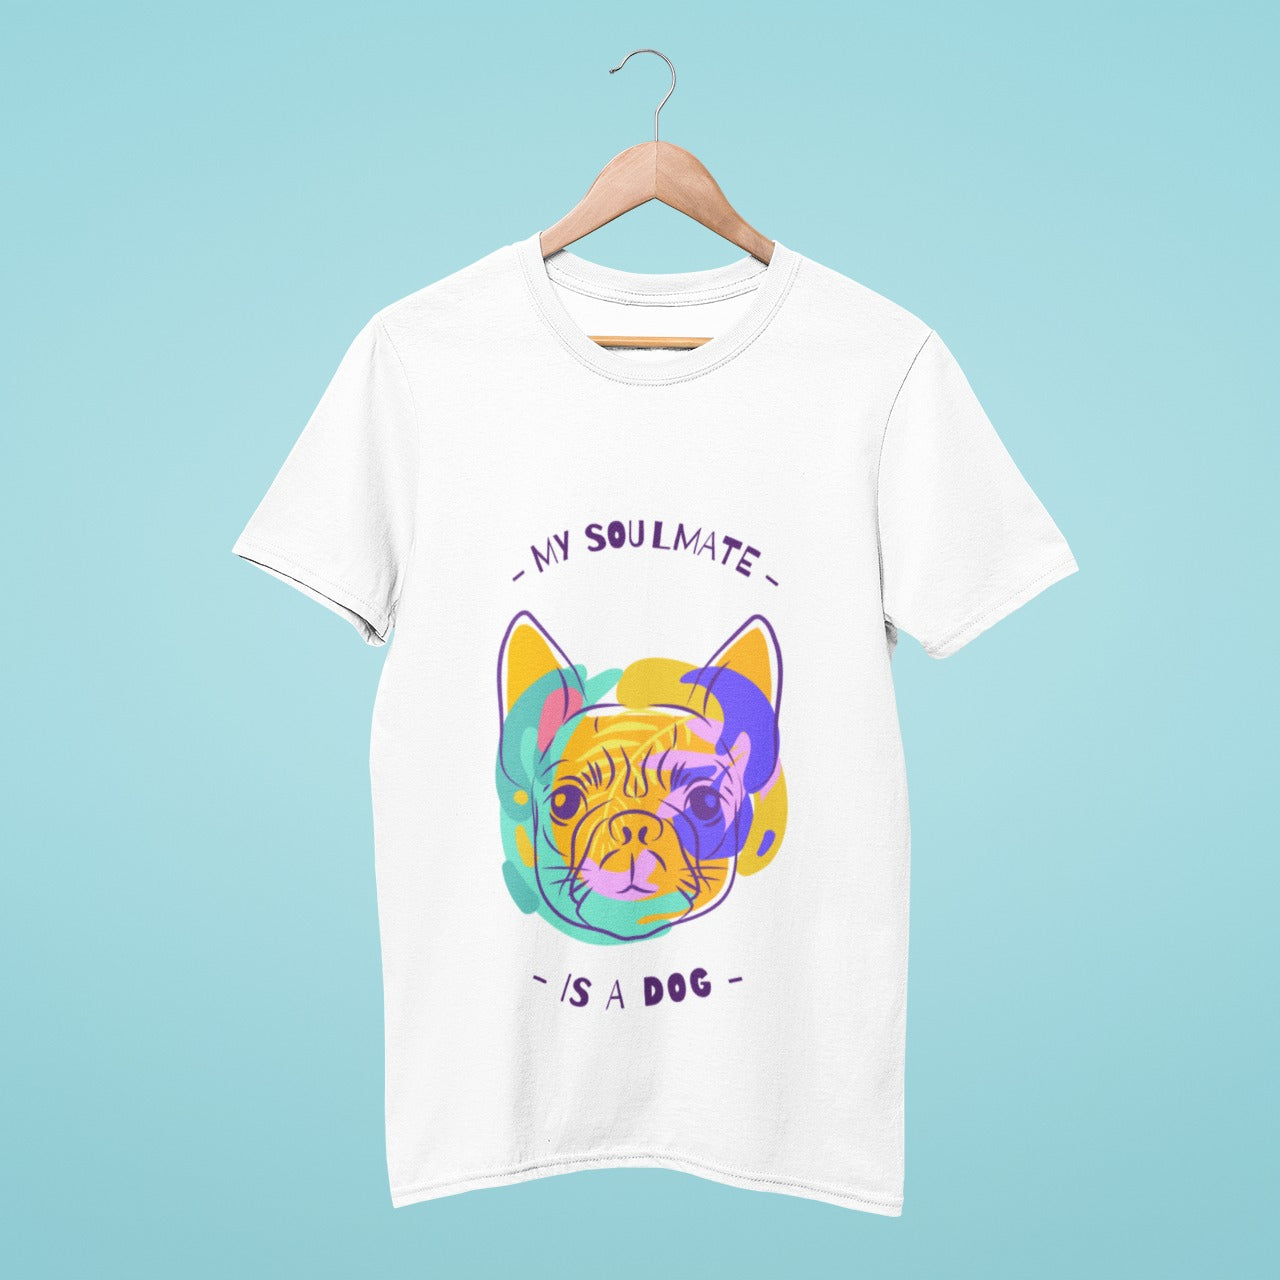 Get trippy with a white t-shirt featuring a painting of a French bulldog and the message "My soulmate is a dog". This unique and eye-catching design is perfect for any dog lover who wants to show off their love for their furry companion. Show the world your bond with your soulmate!